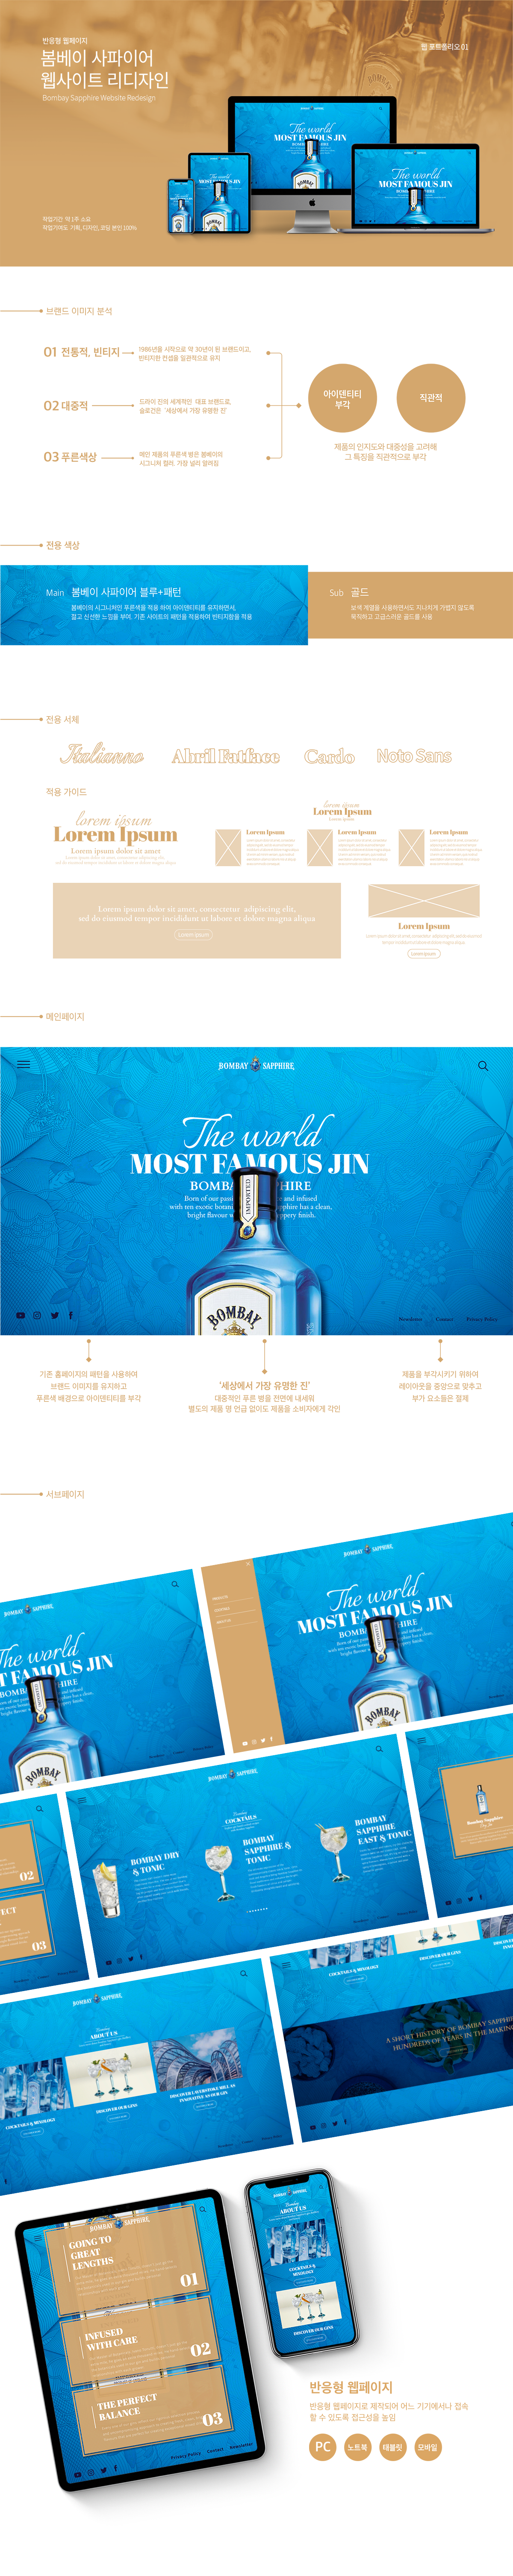 bombay sapphire webpage redesign